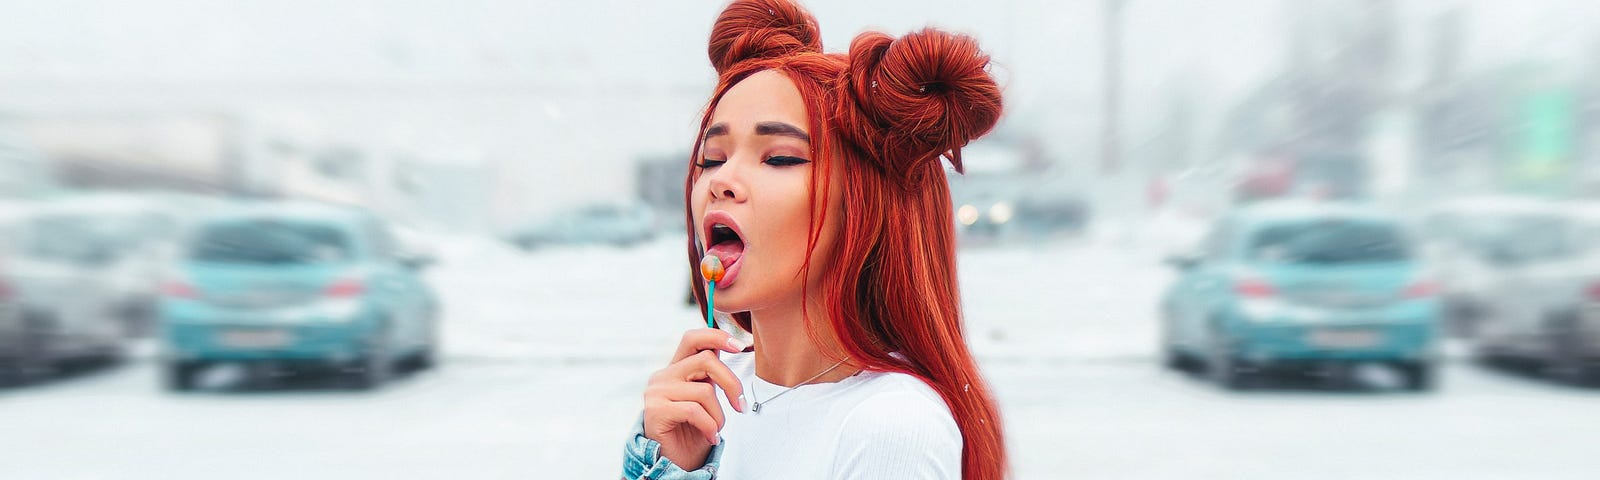 A woman in a denim jacket with red hair licking a lollipop standing in a carpark. Photo: Andrey Zvyagintsev on Unsplash